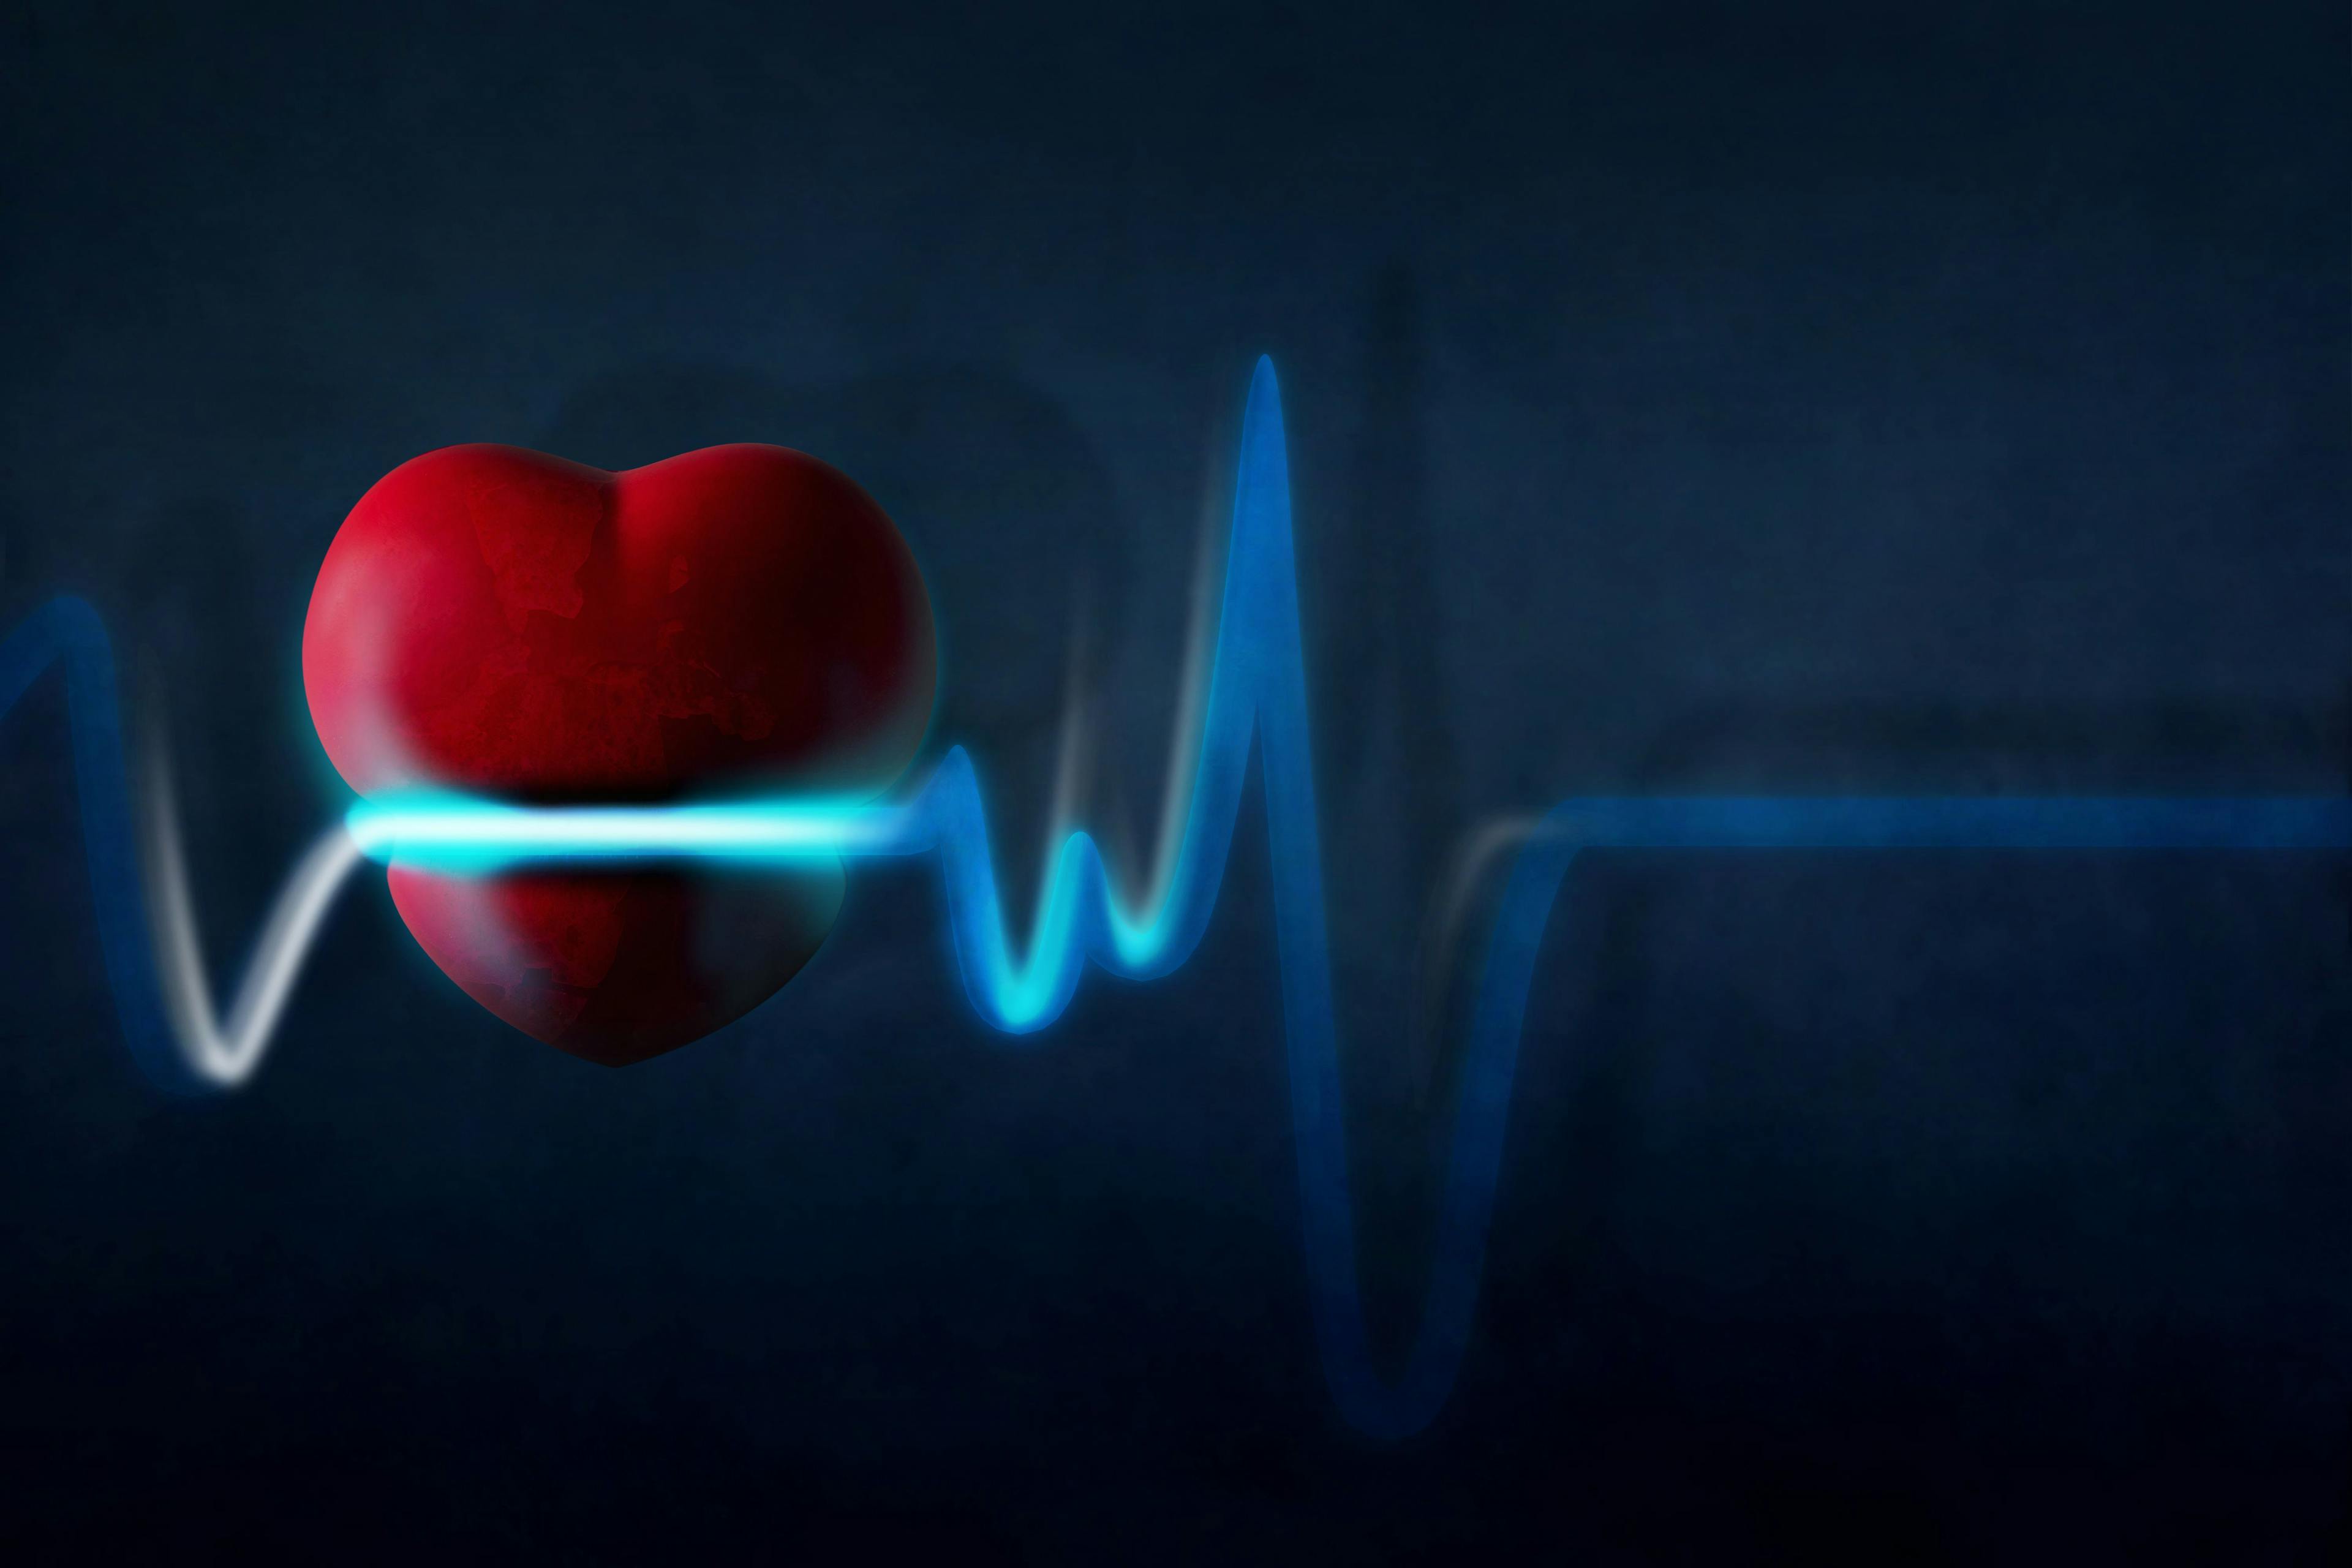 Heart Pain or Attack Concept, Healthcare and Problem present by Stressed Grunge Heart and Rate Beat. Credit: blacksalmon - stock.adobe.com